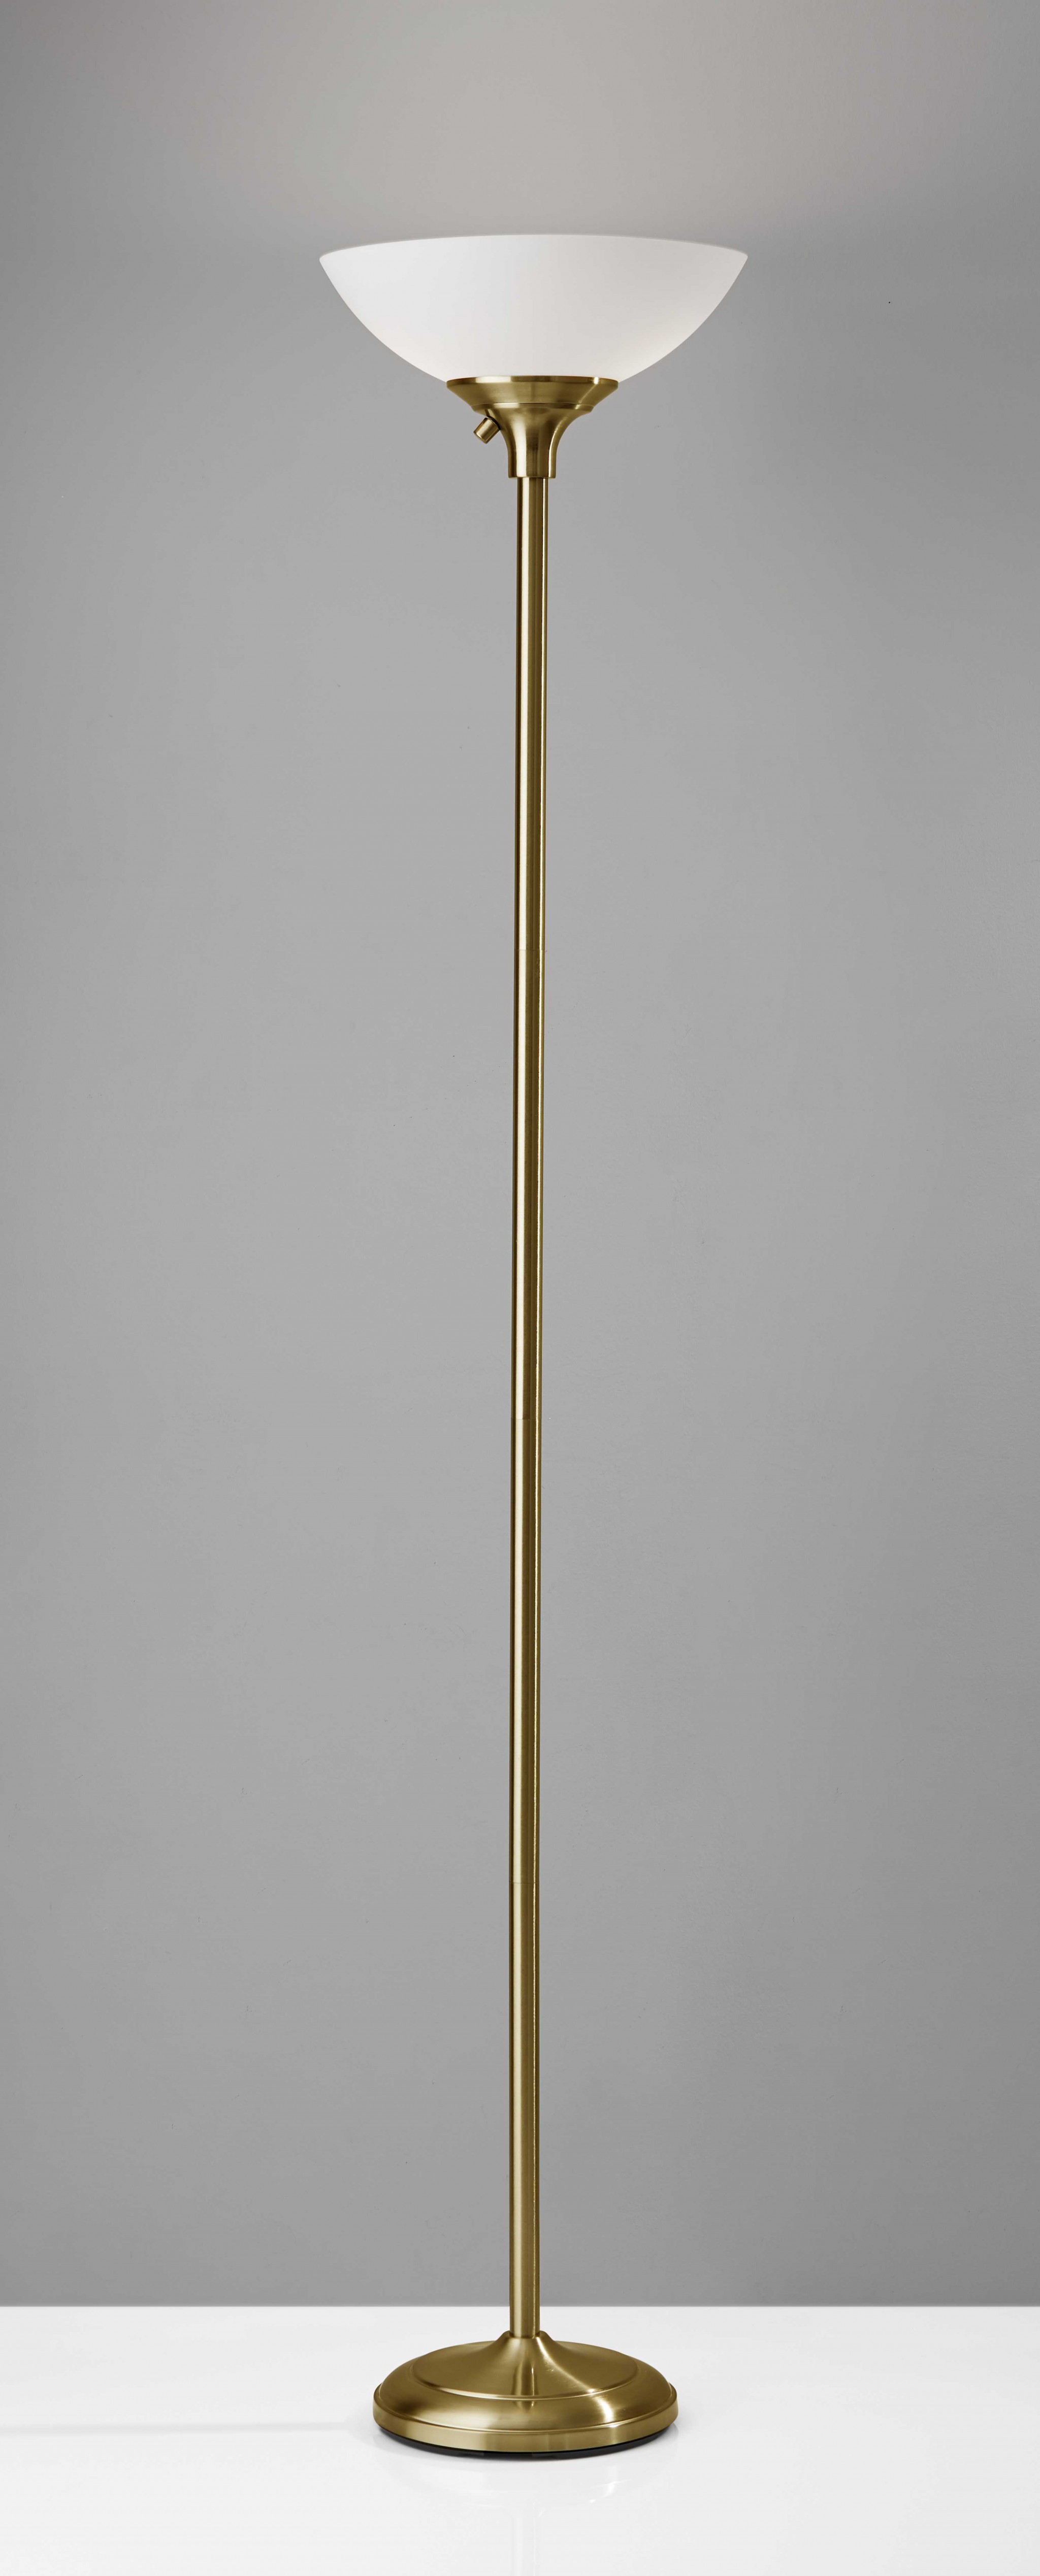 Shiny Antiqued Brass Metal Torchiere Floor Lamp-372814-1